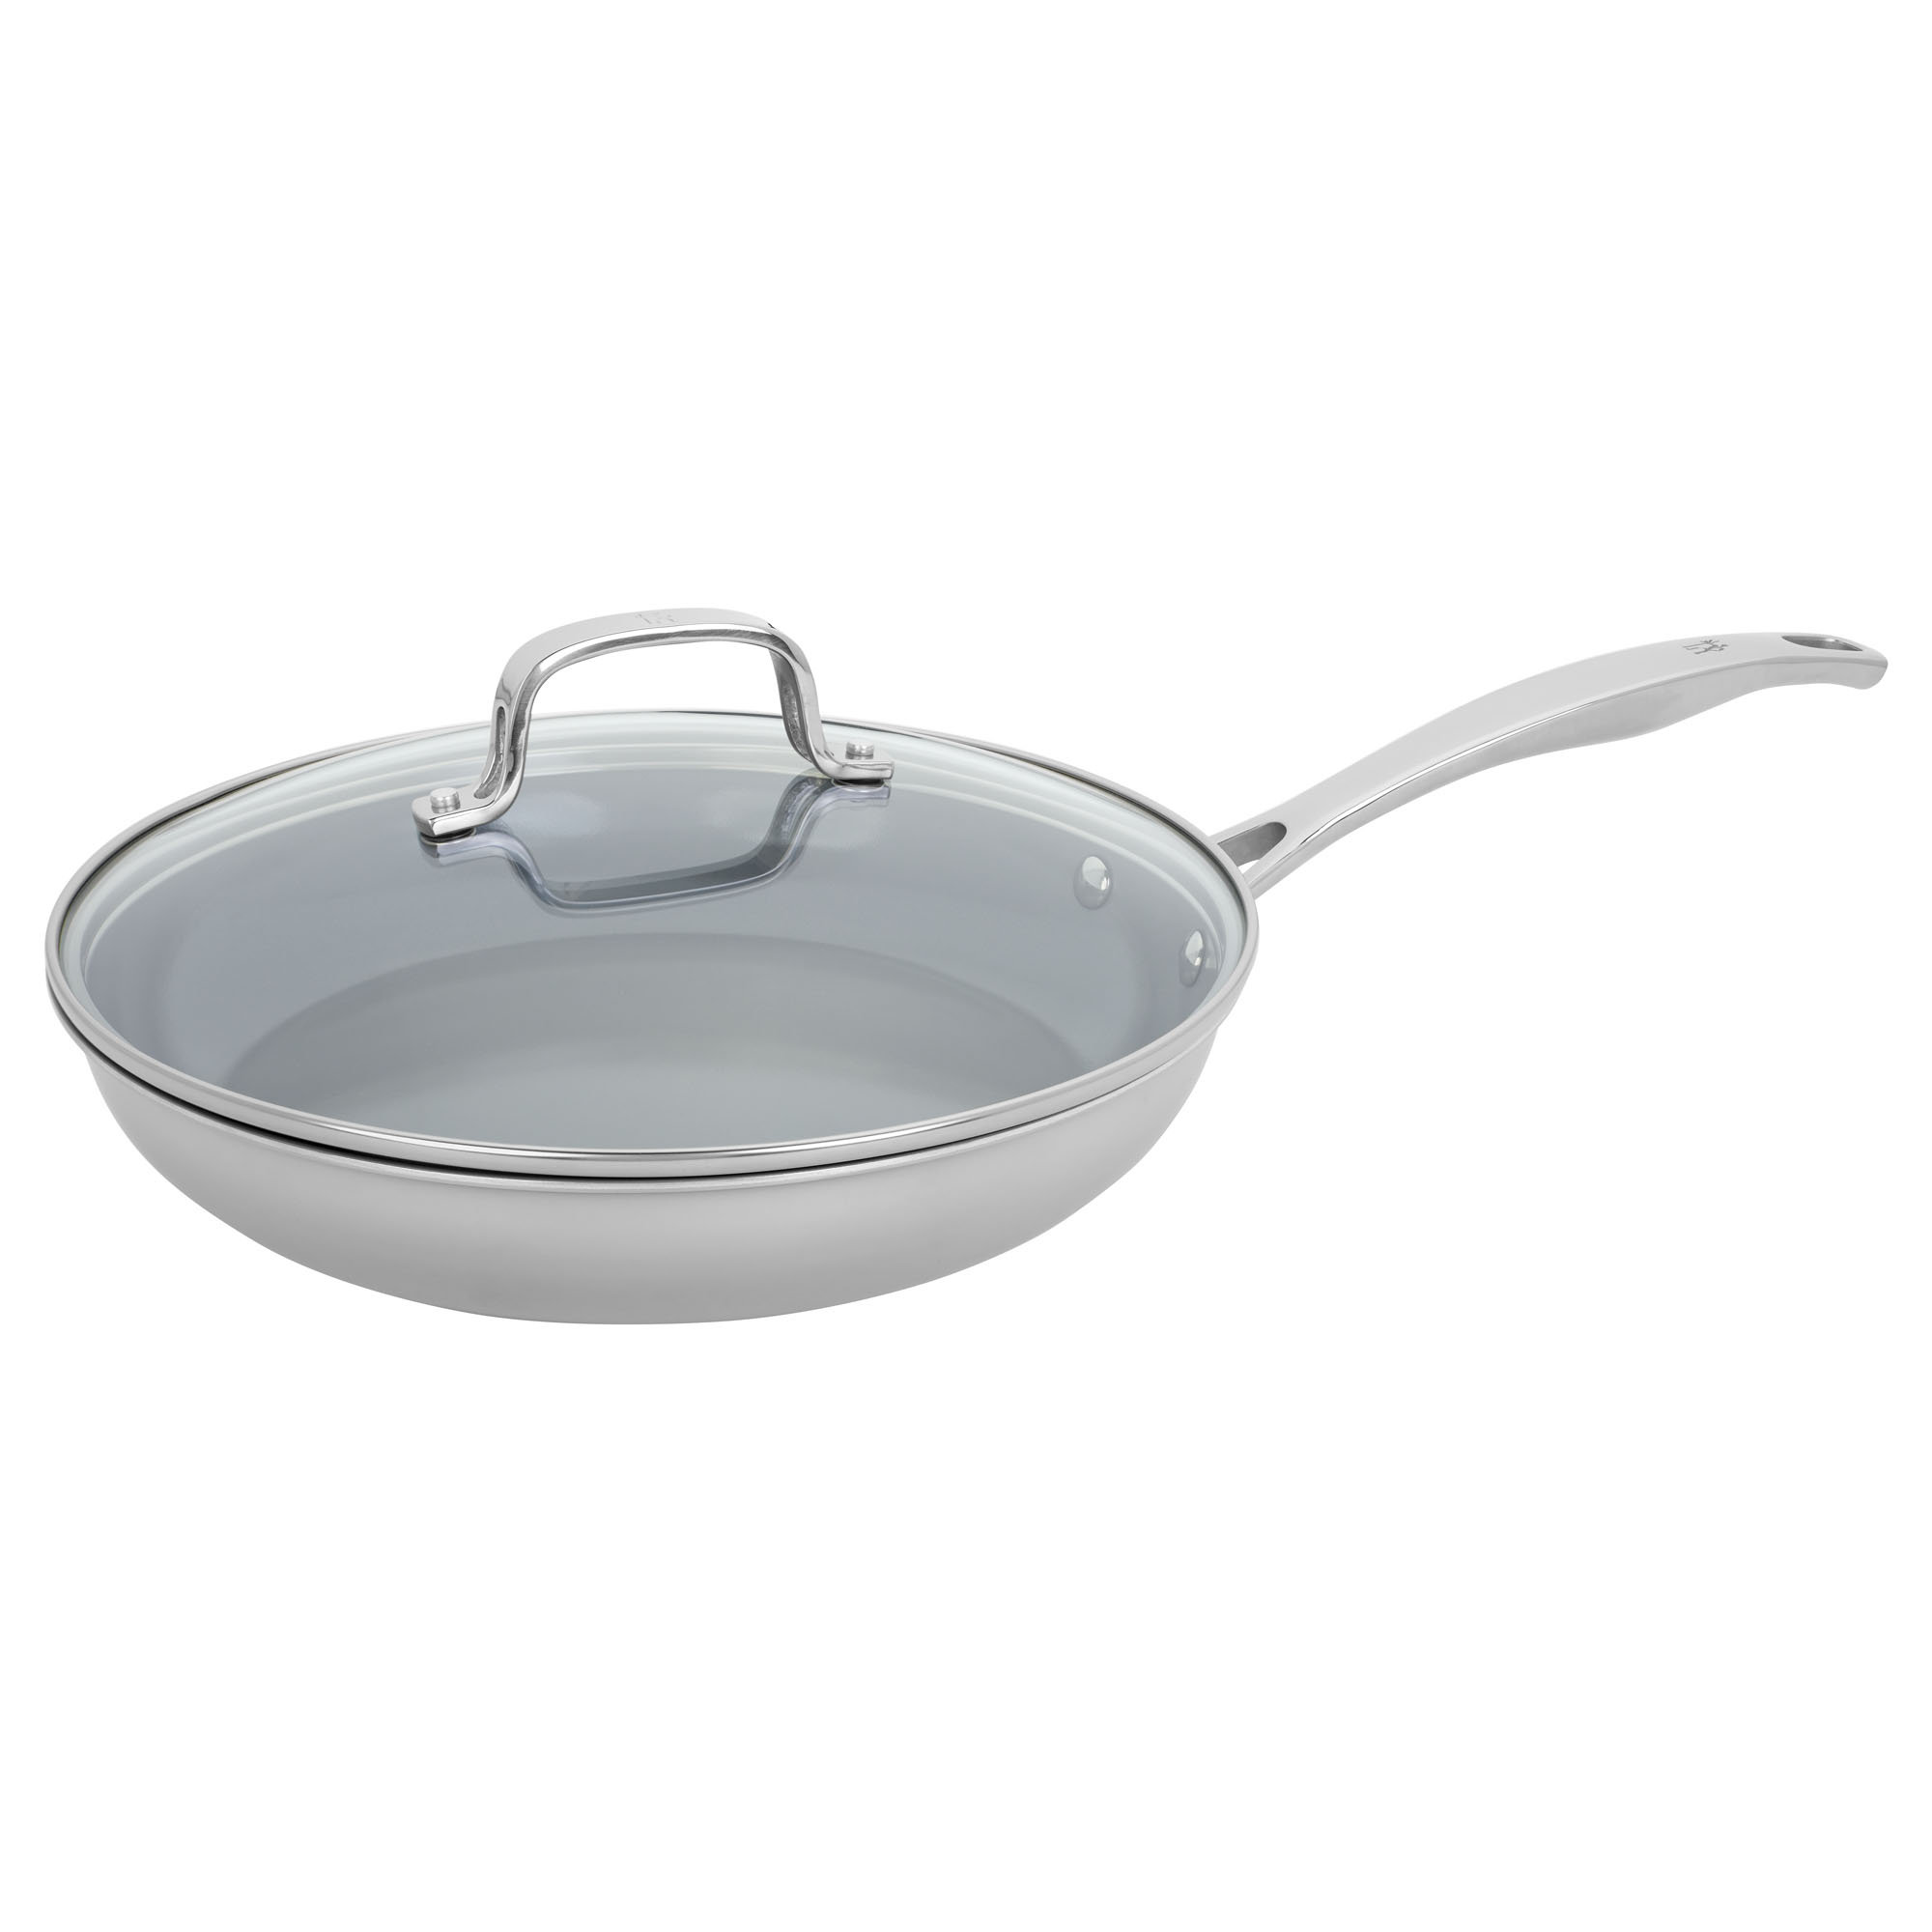 ZWILLING Clad CFX 10-inch, stainless steel, Ceramic, Non-stick, Frying pan